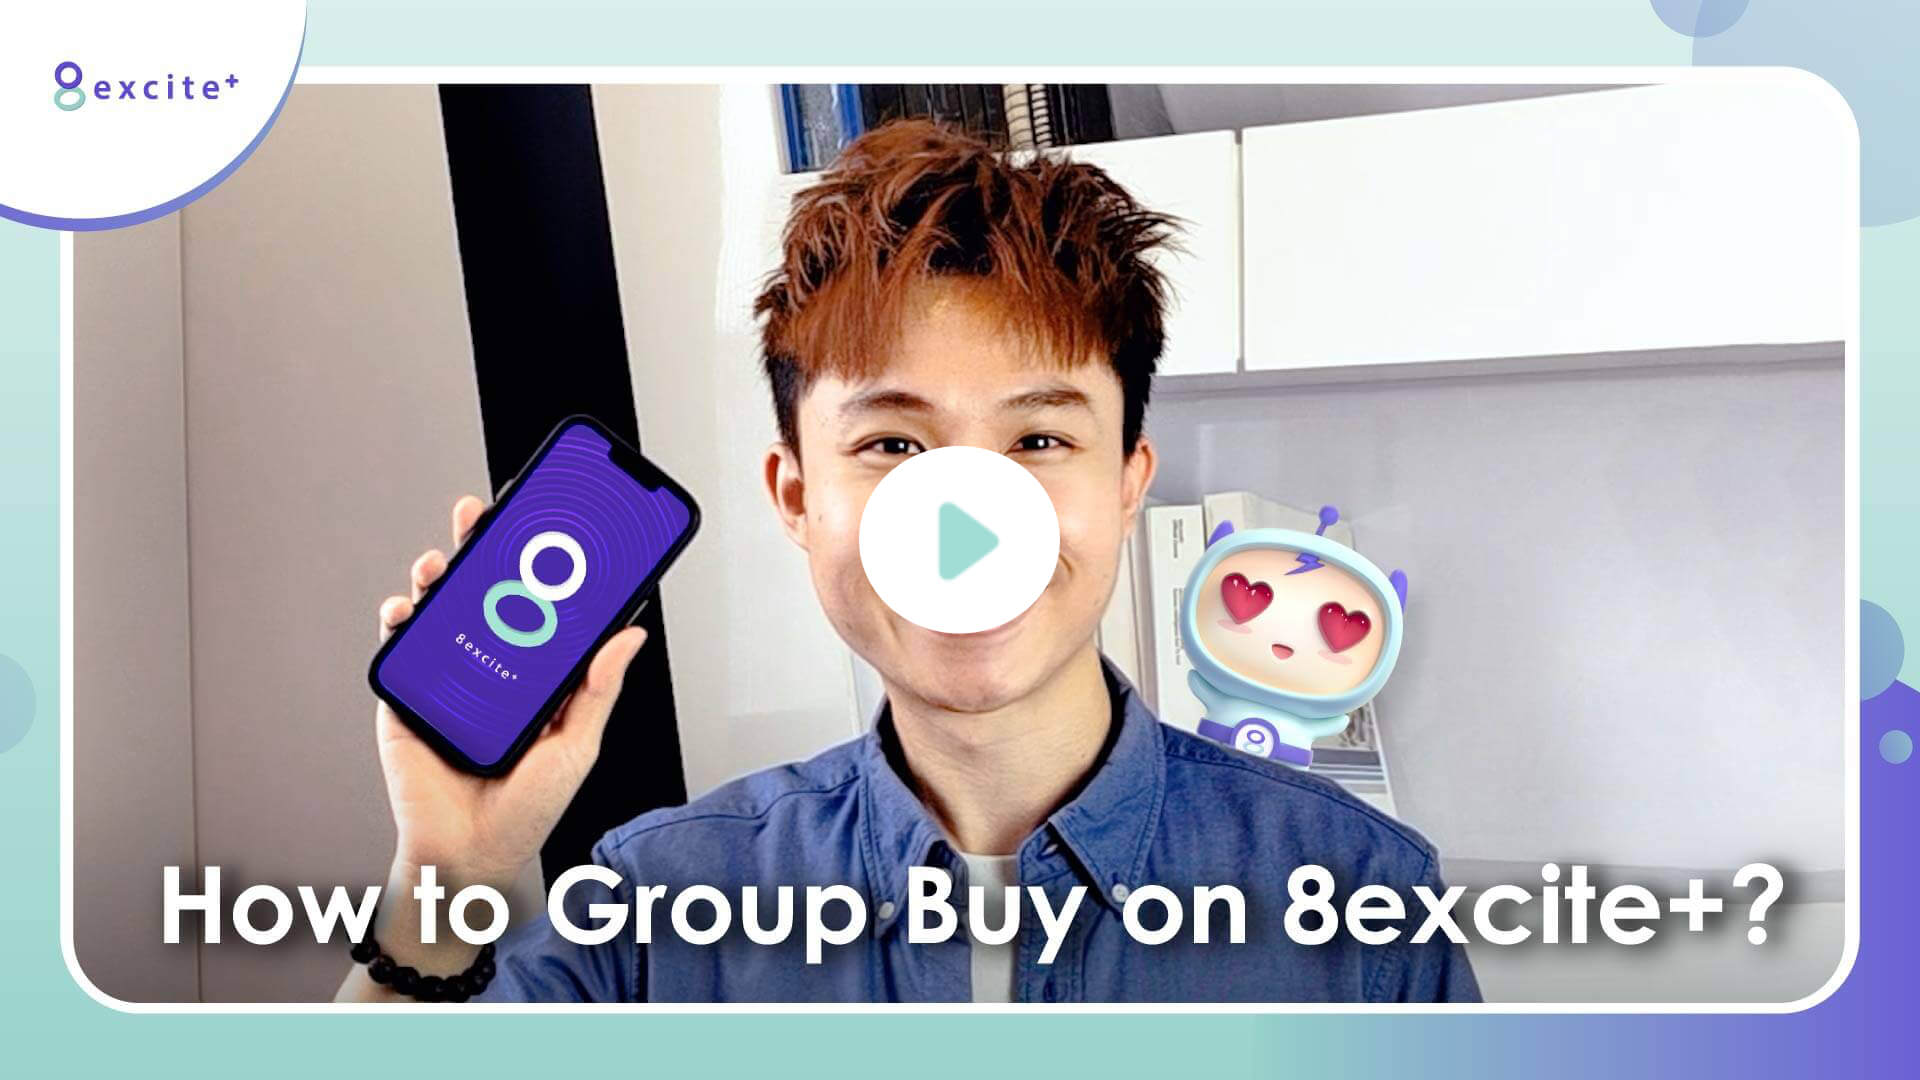 How to Groupbuy on 8excite+